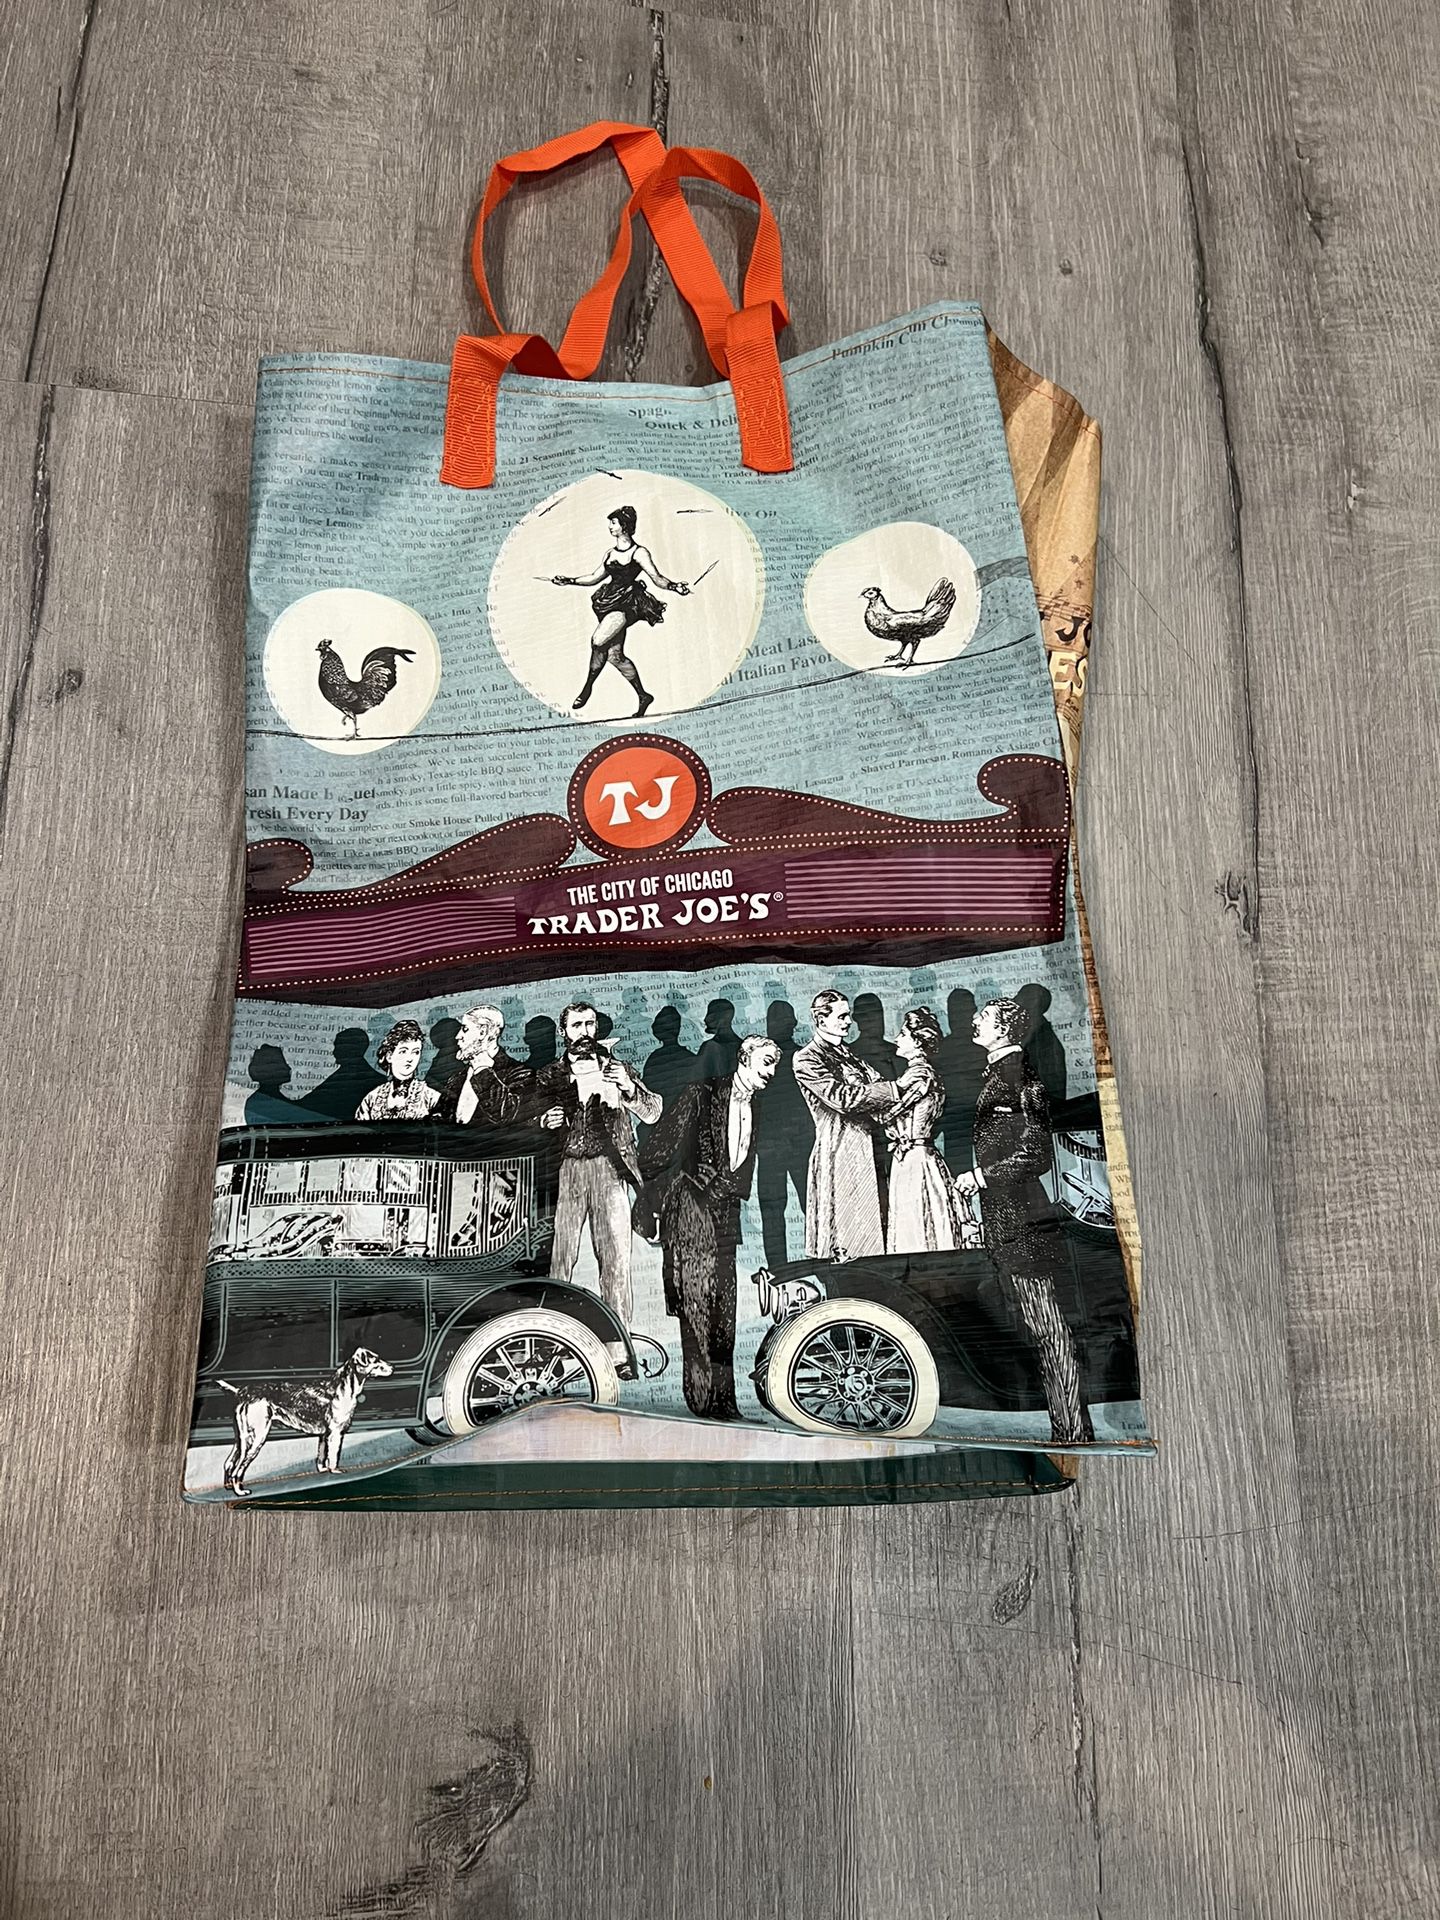 Chicago Tote Bag